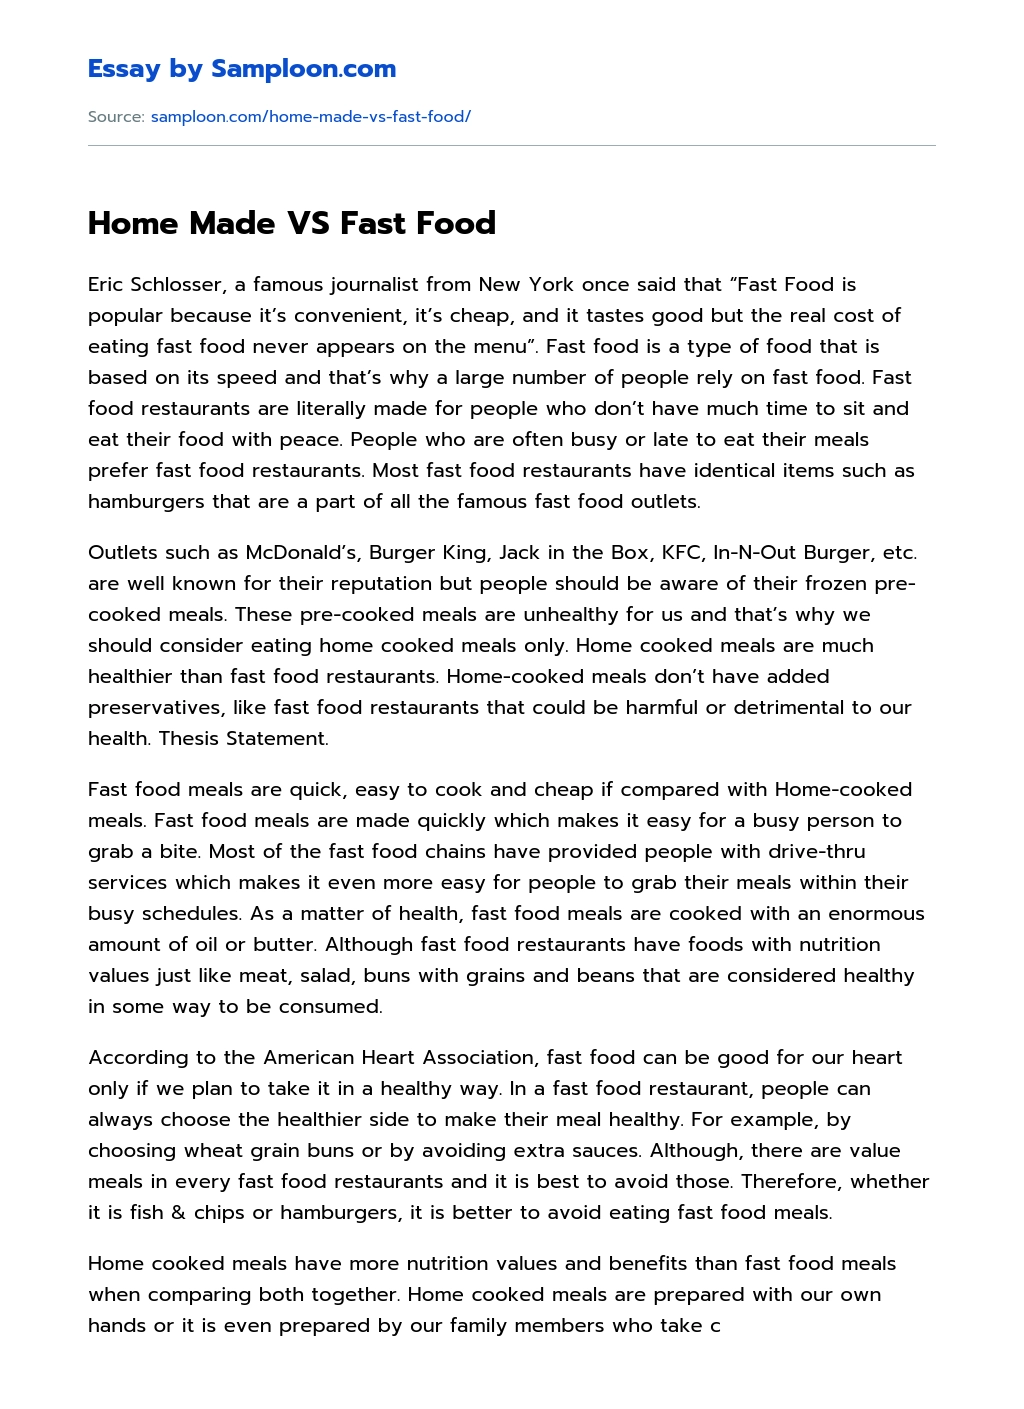 Home Made VS Fast Food Compare And Contrast essay